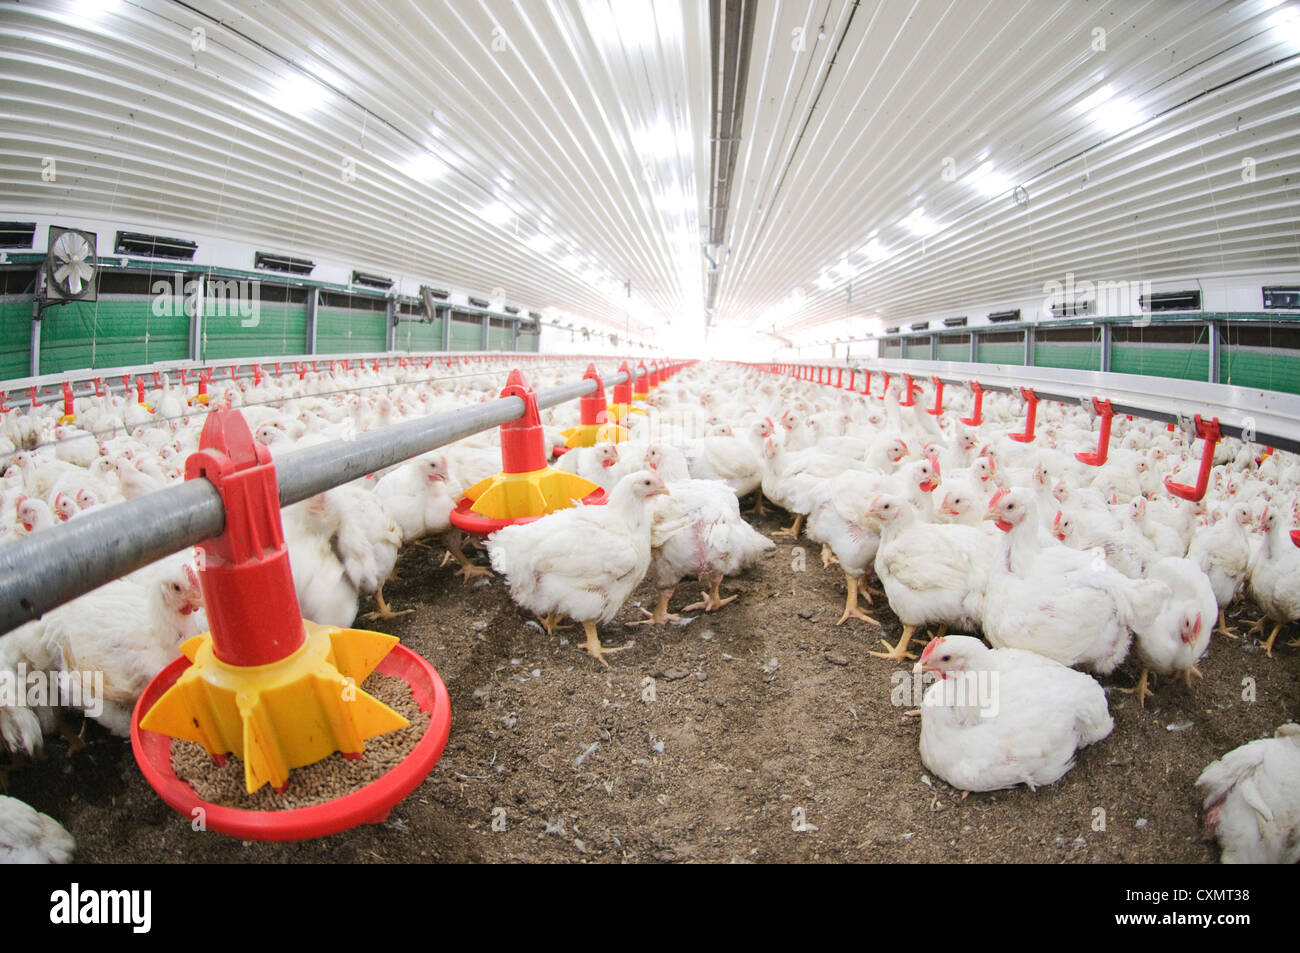 Poultry Farming. Chicks in a coop two days before slaughter Photographed in Israel, Kibbutz Maagan Michael Stock Photo